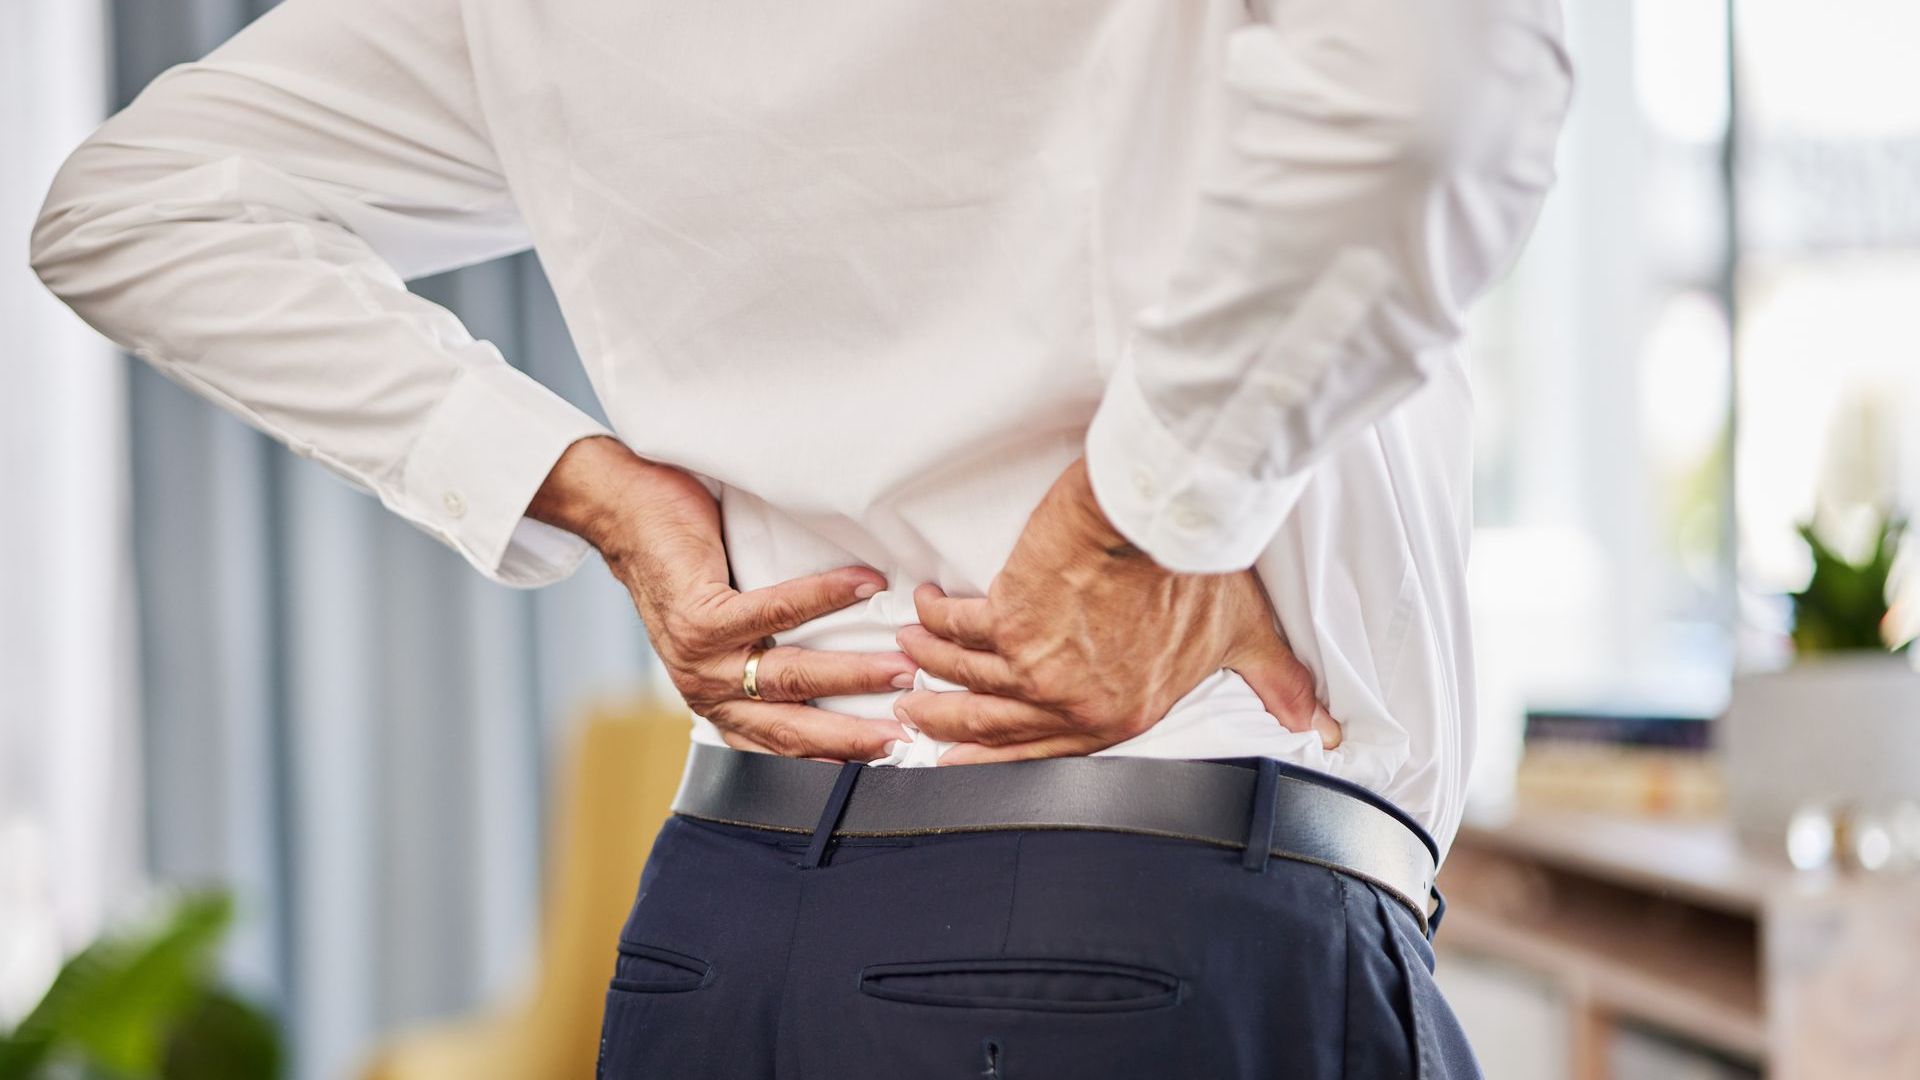 Man with lower back pain in the office - he is holding his lower back with both hands, as if in pain. He is wearing a white shirt, blue trousers, a black belt and wearing a wedding ring. 